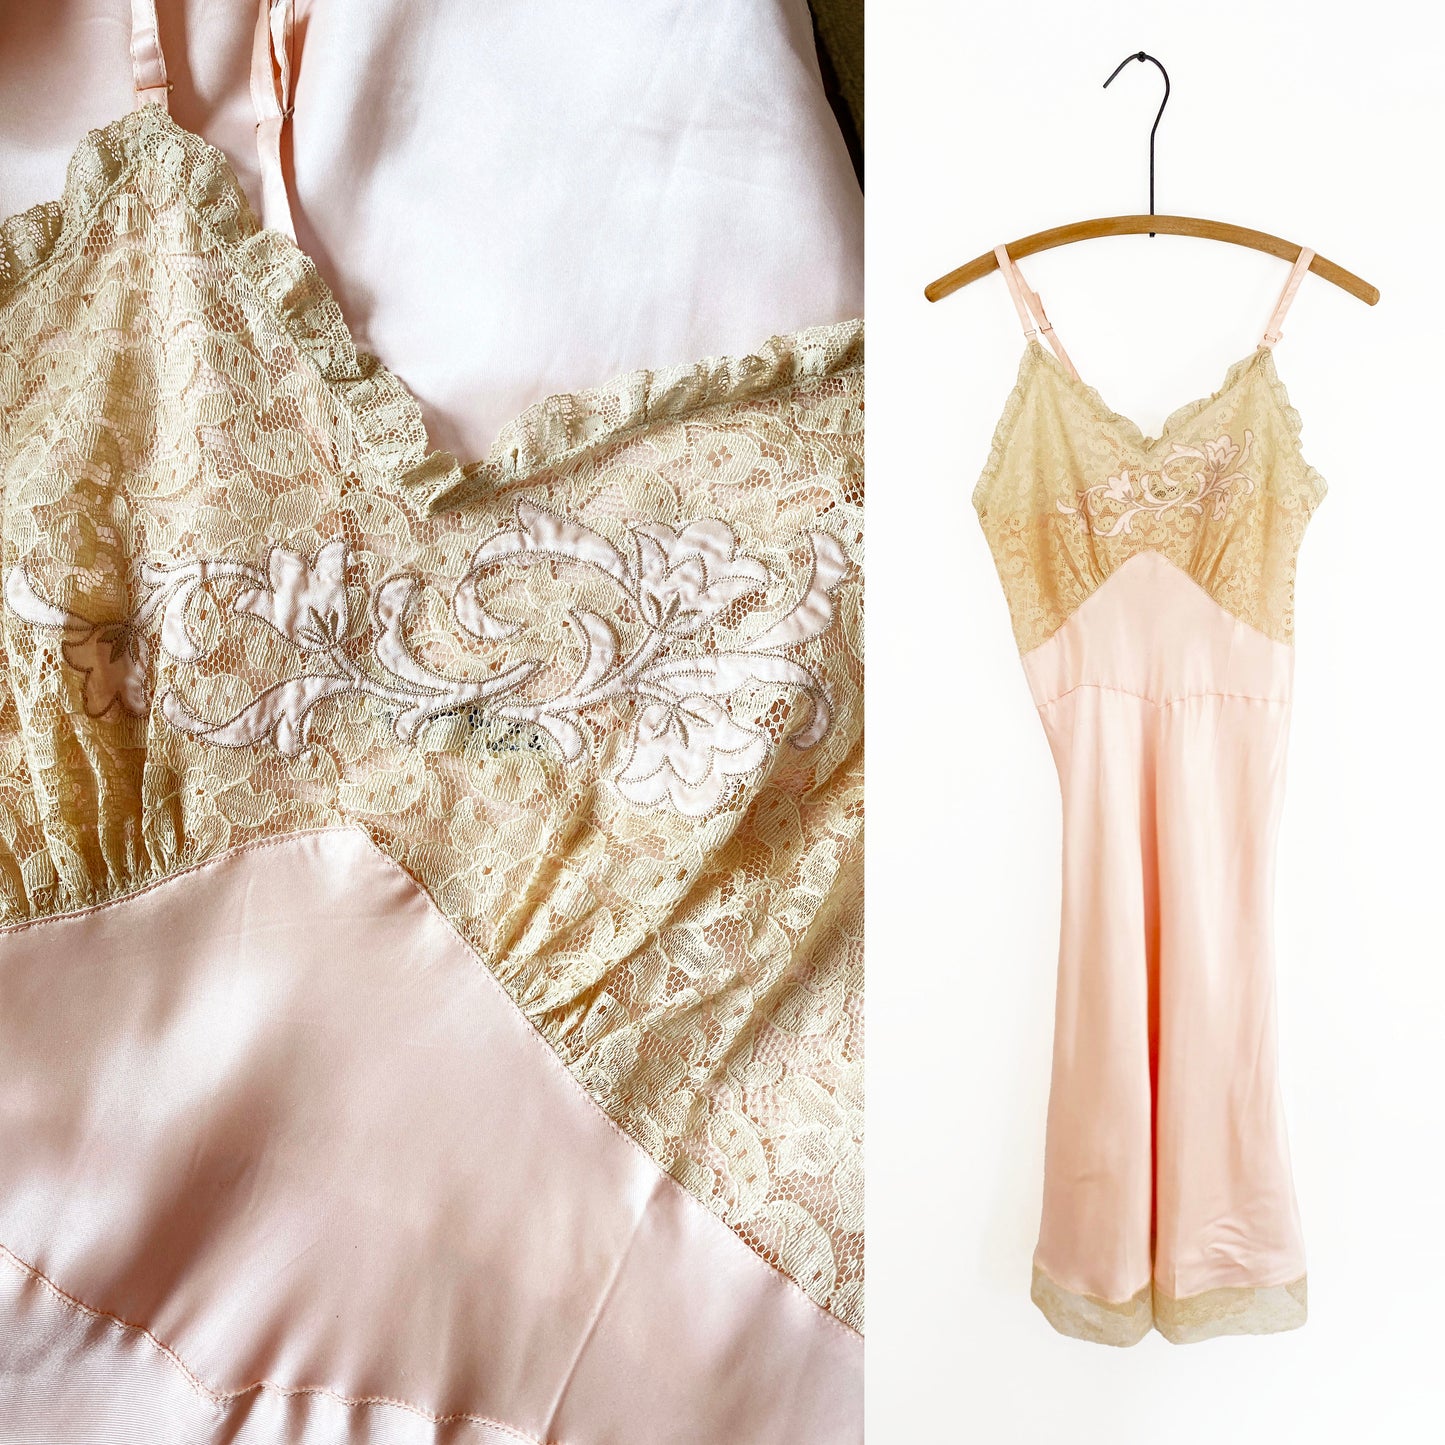 1940s Blush Pink Bias Cut Silky Rayon Nightgown with Lace Trim Slip Embroidery Pin Up Sexy / Cover Girl / Extra Small